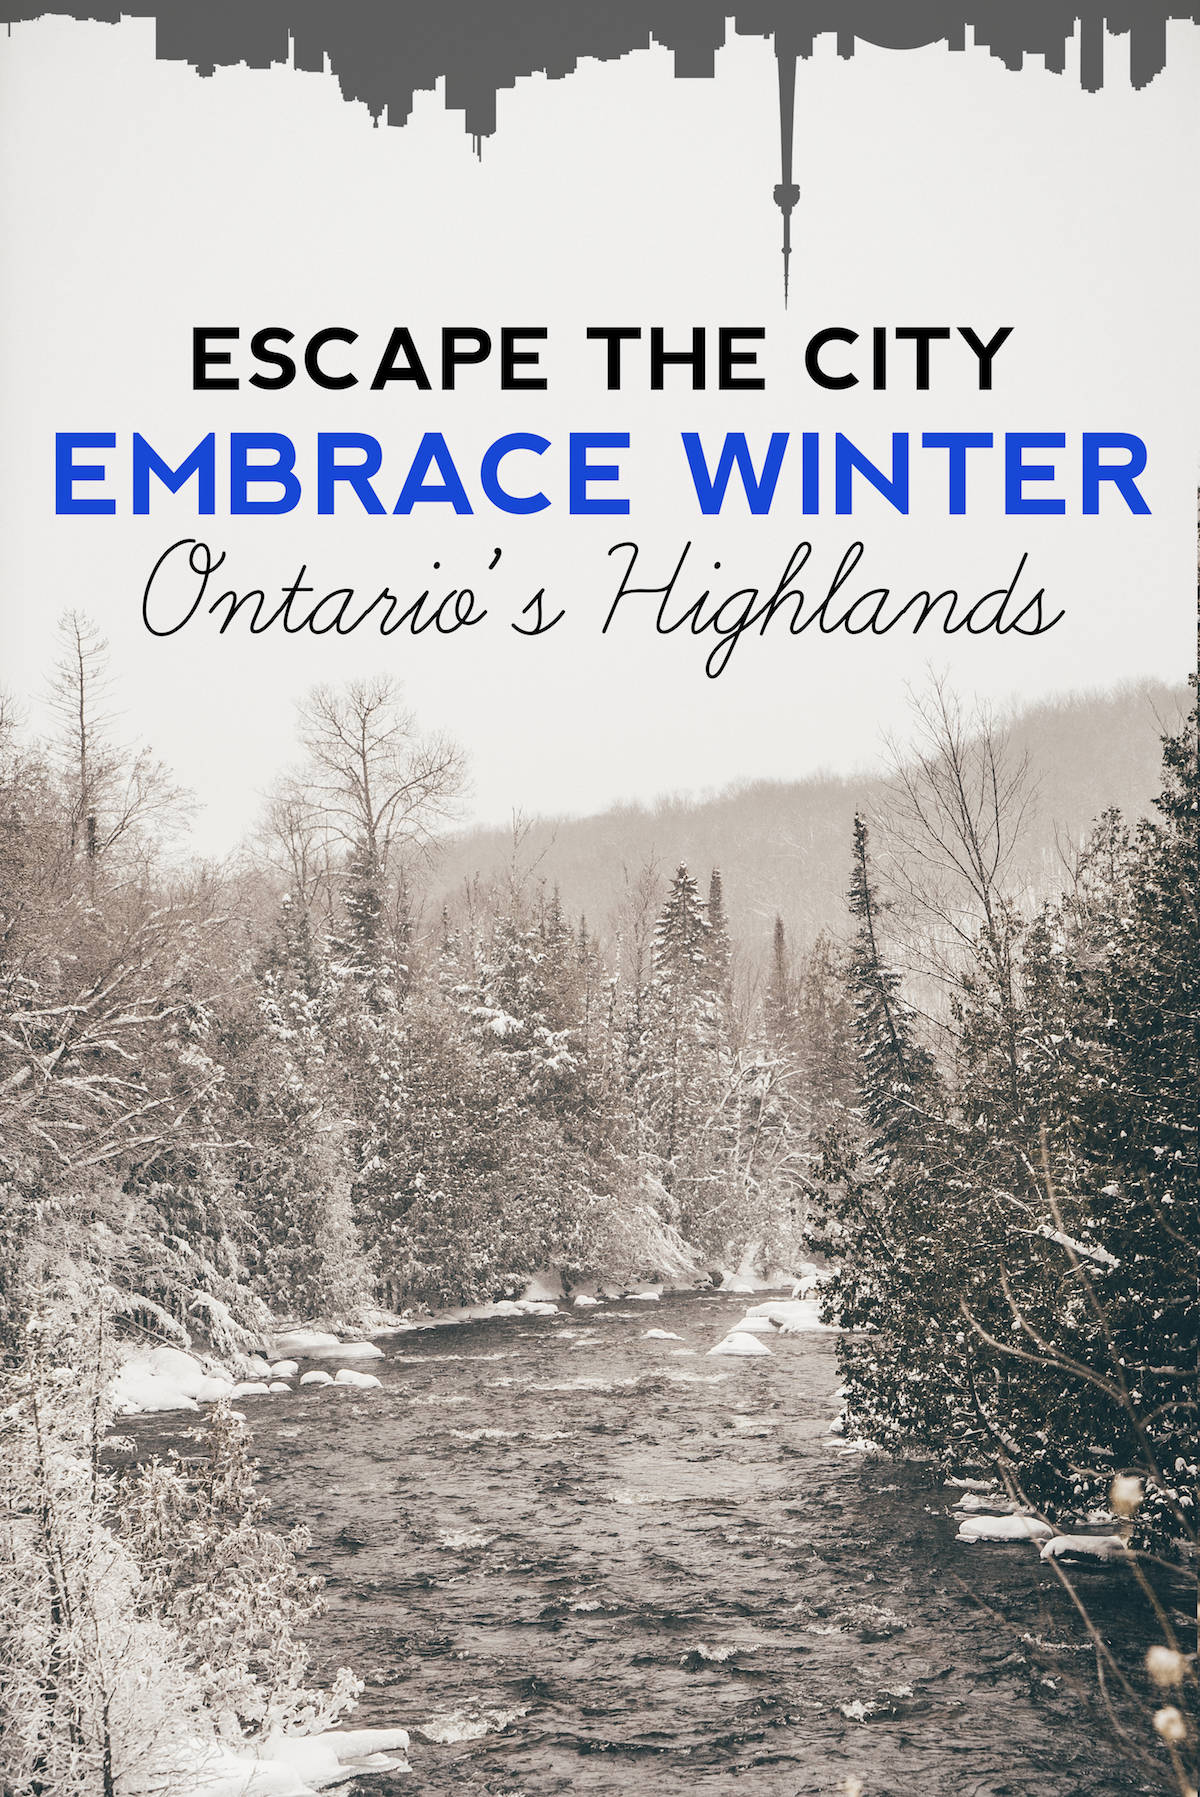 Escape the city and embrace winter in Ontario's Highlands